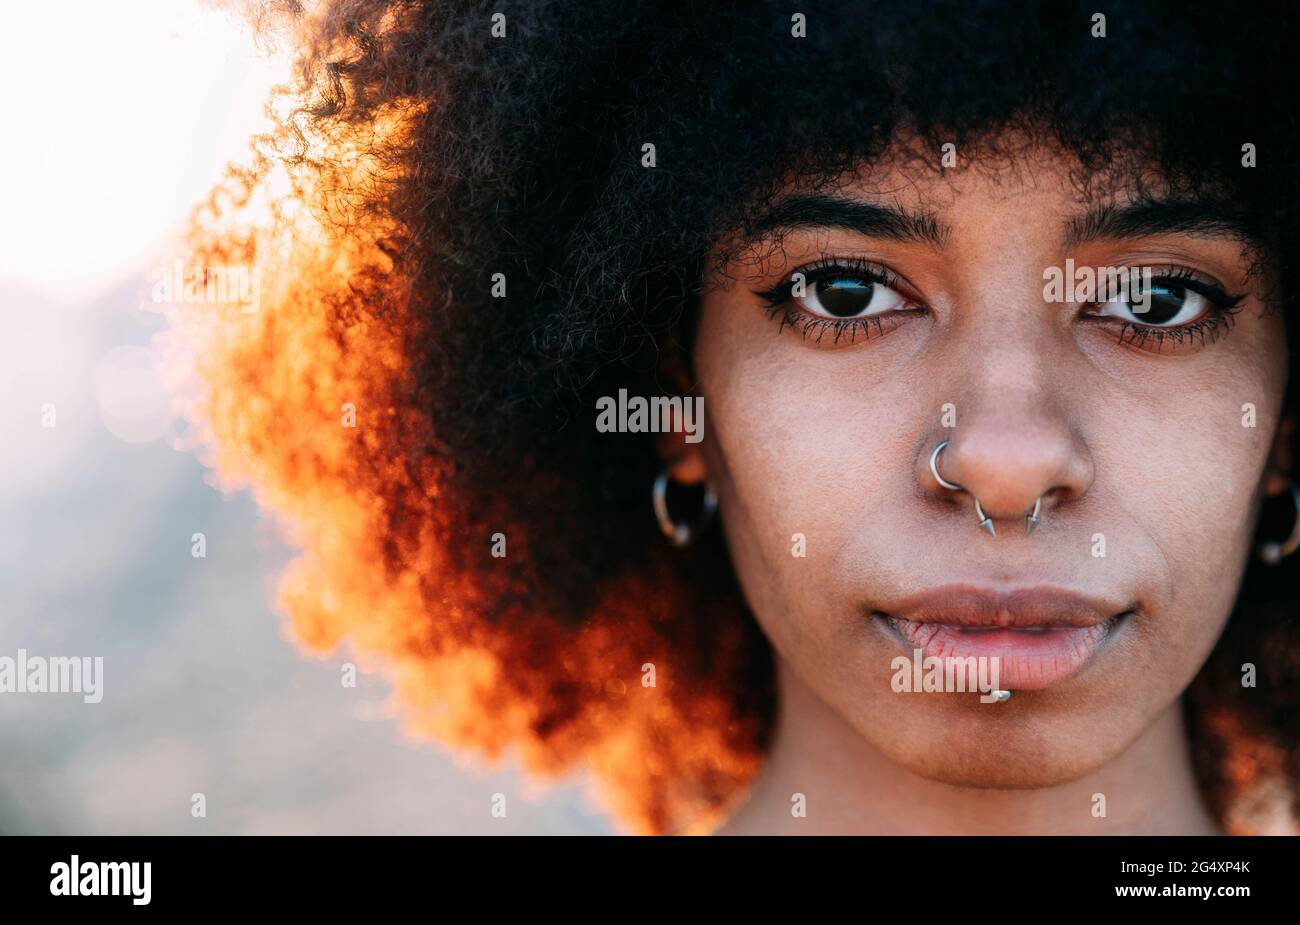 Beautiful woman with pierced nose at beach Stock Photo